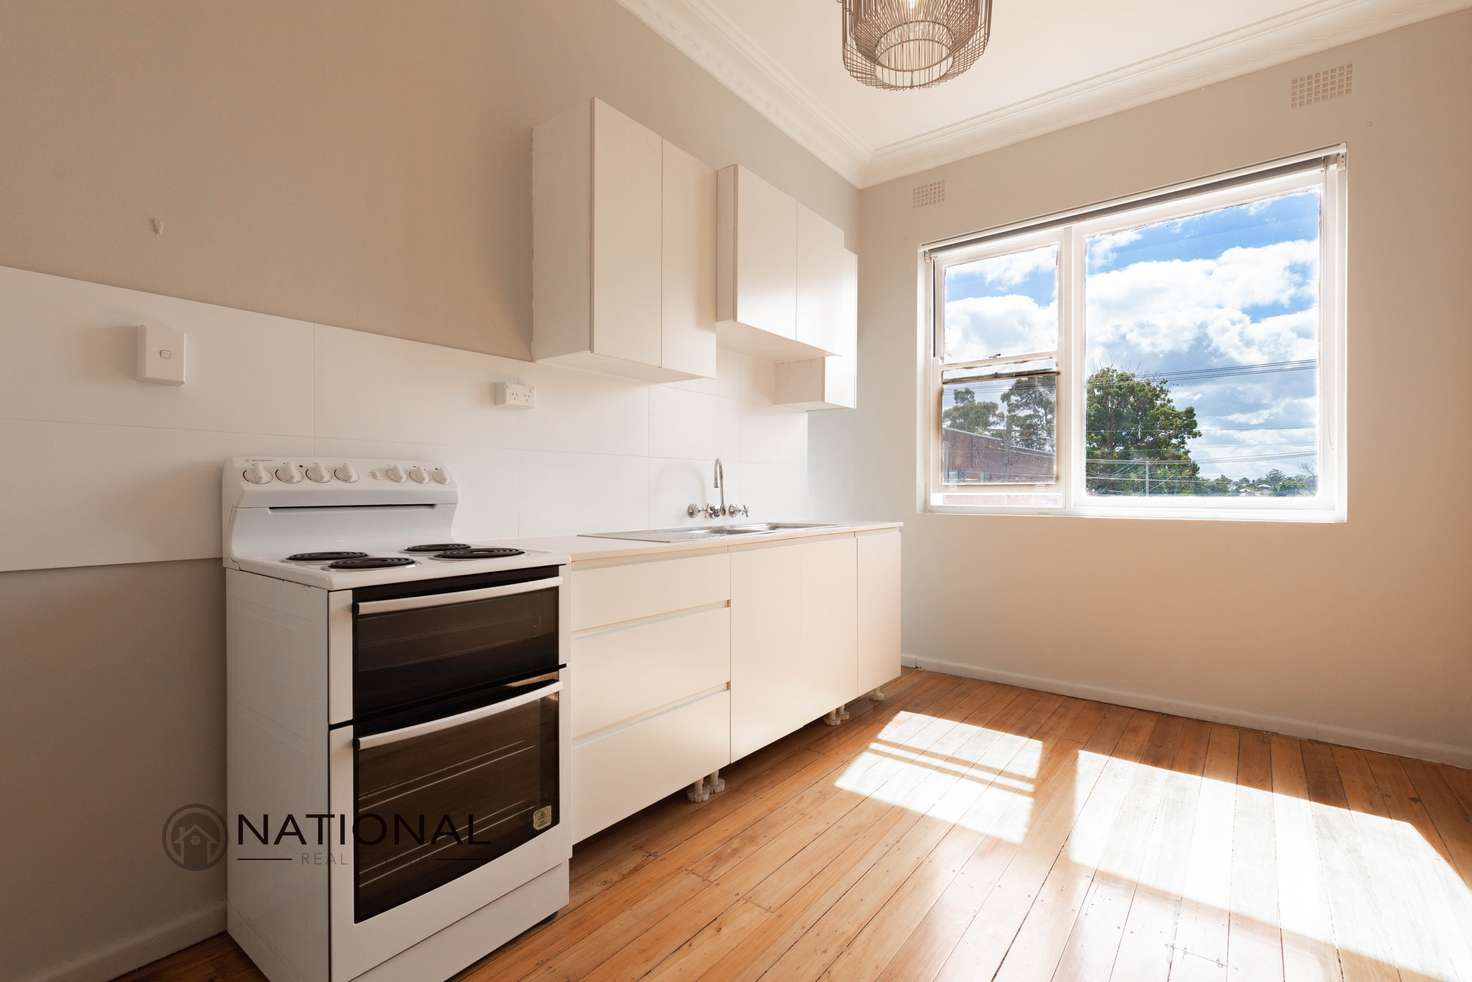 Main view of Homely unit listing, 4/382 Guildford Rd, Guildford NSW 2161